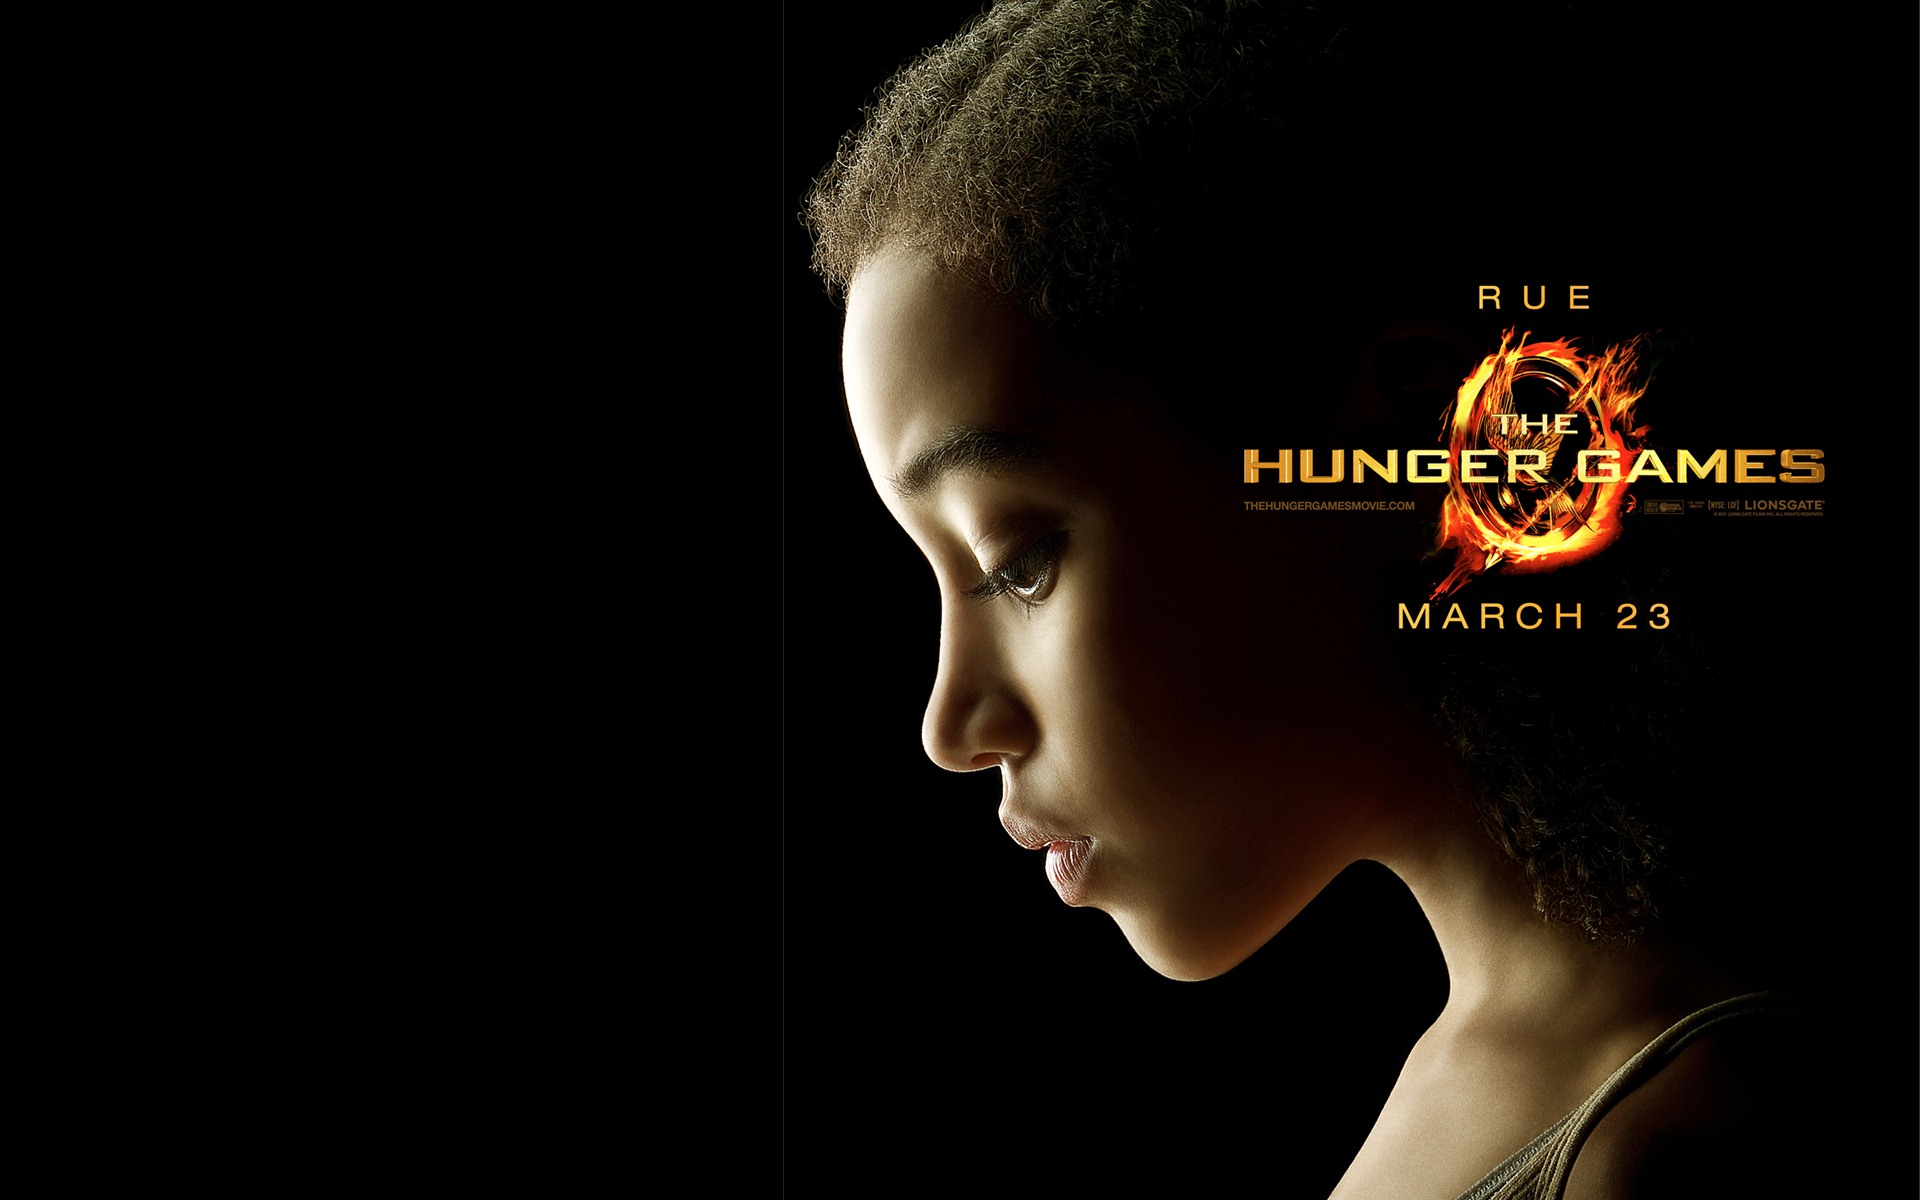 The Hunger Games HD wallpapers #2 - 1920x1200